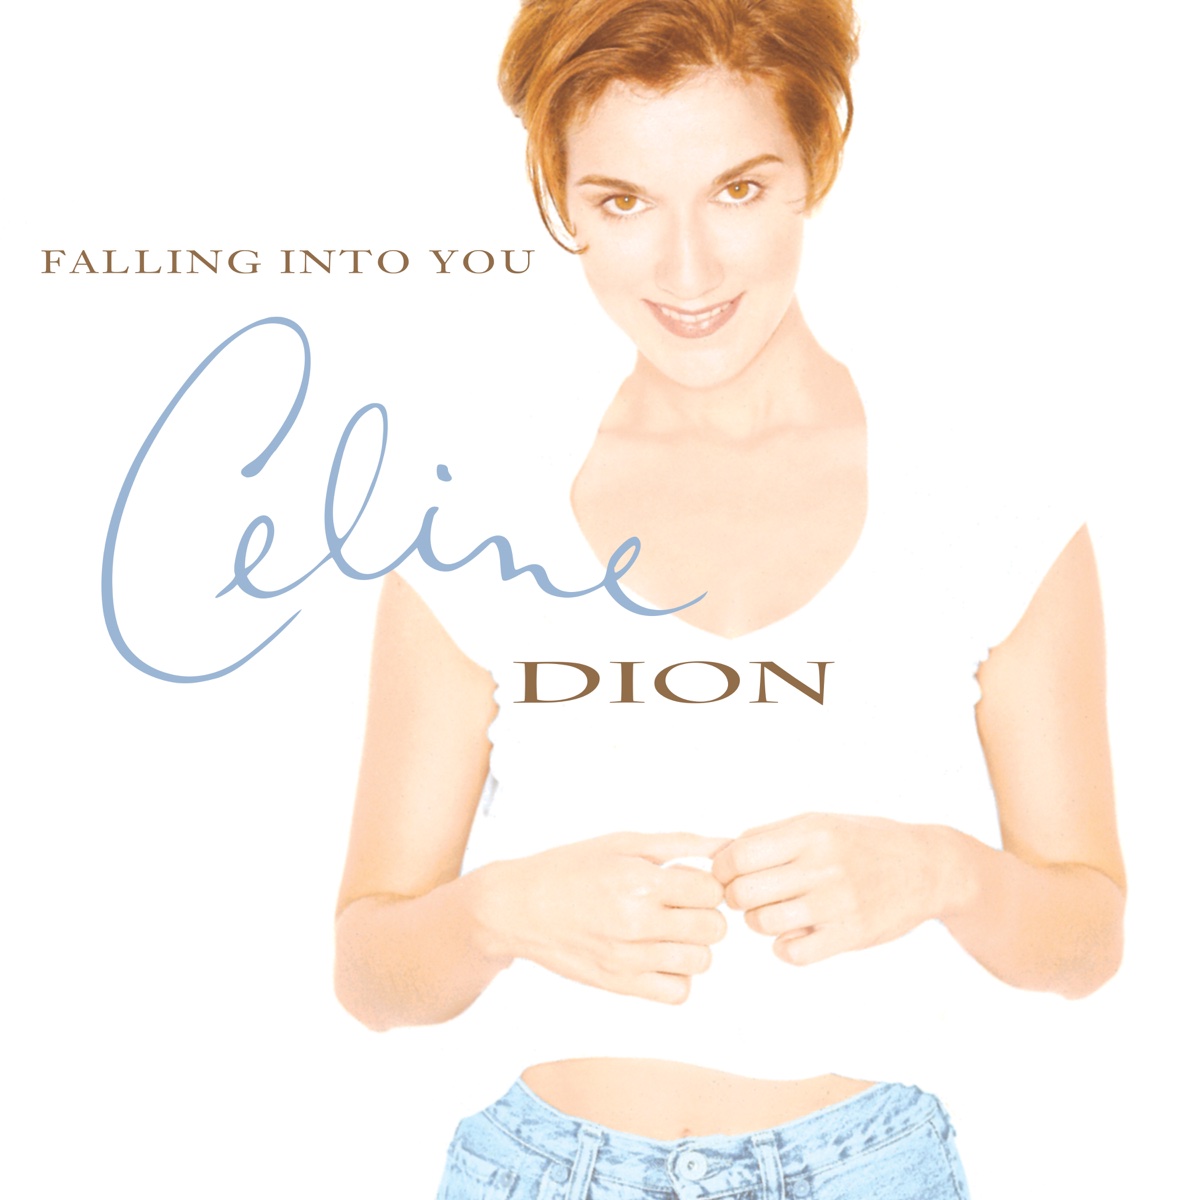 radiowhat.com #NowPlaying Because You Loved Me by Celine Dion #radio #internetradio #music #hiphop #dj #podcast #radioshow #musica #rap #disco #dance #spotify #media #fm #radiostation #onair #producer #rock #djs 
 Buy song links.autopo.st/eu1q